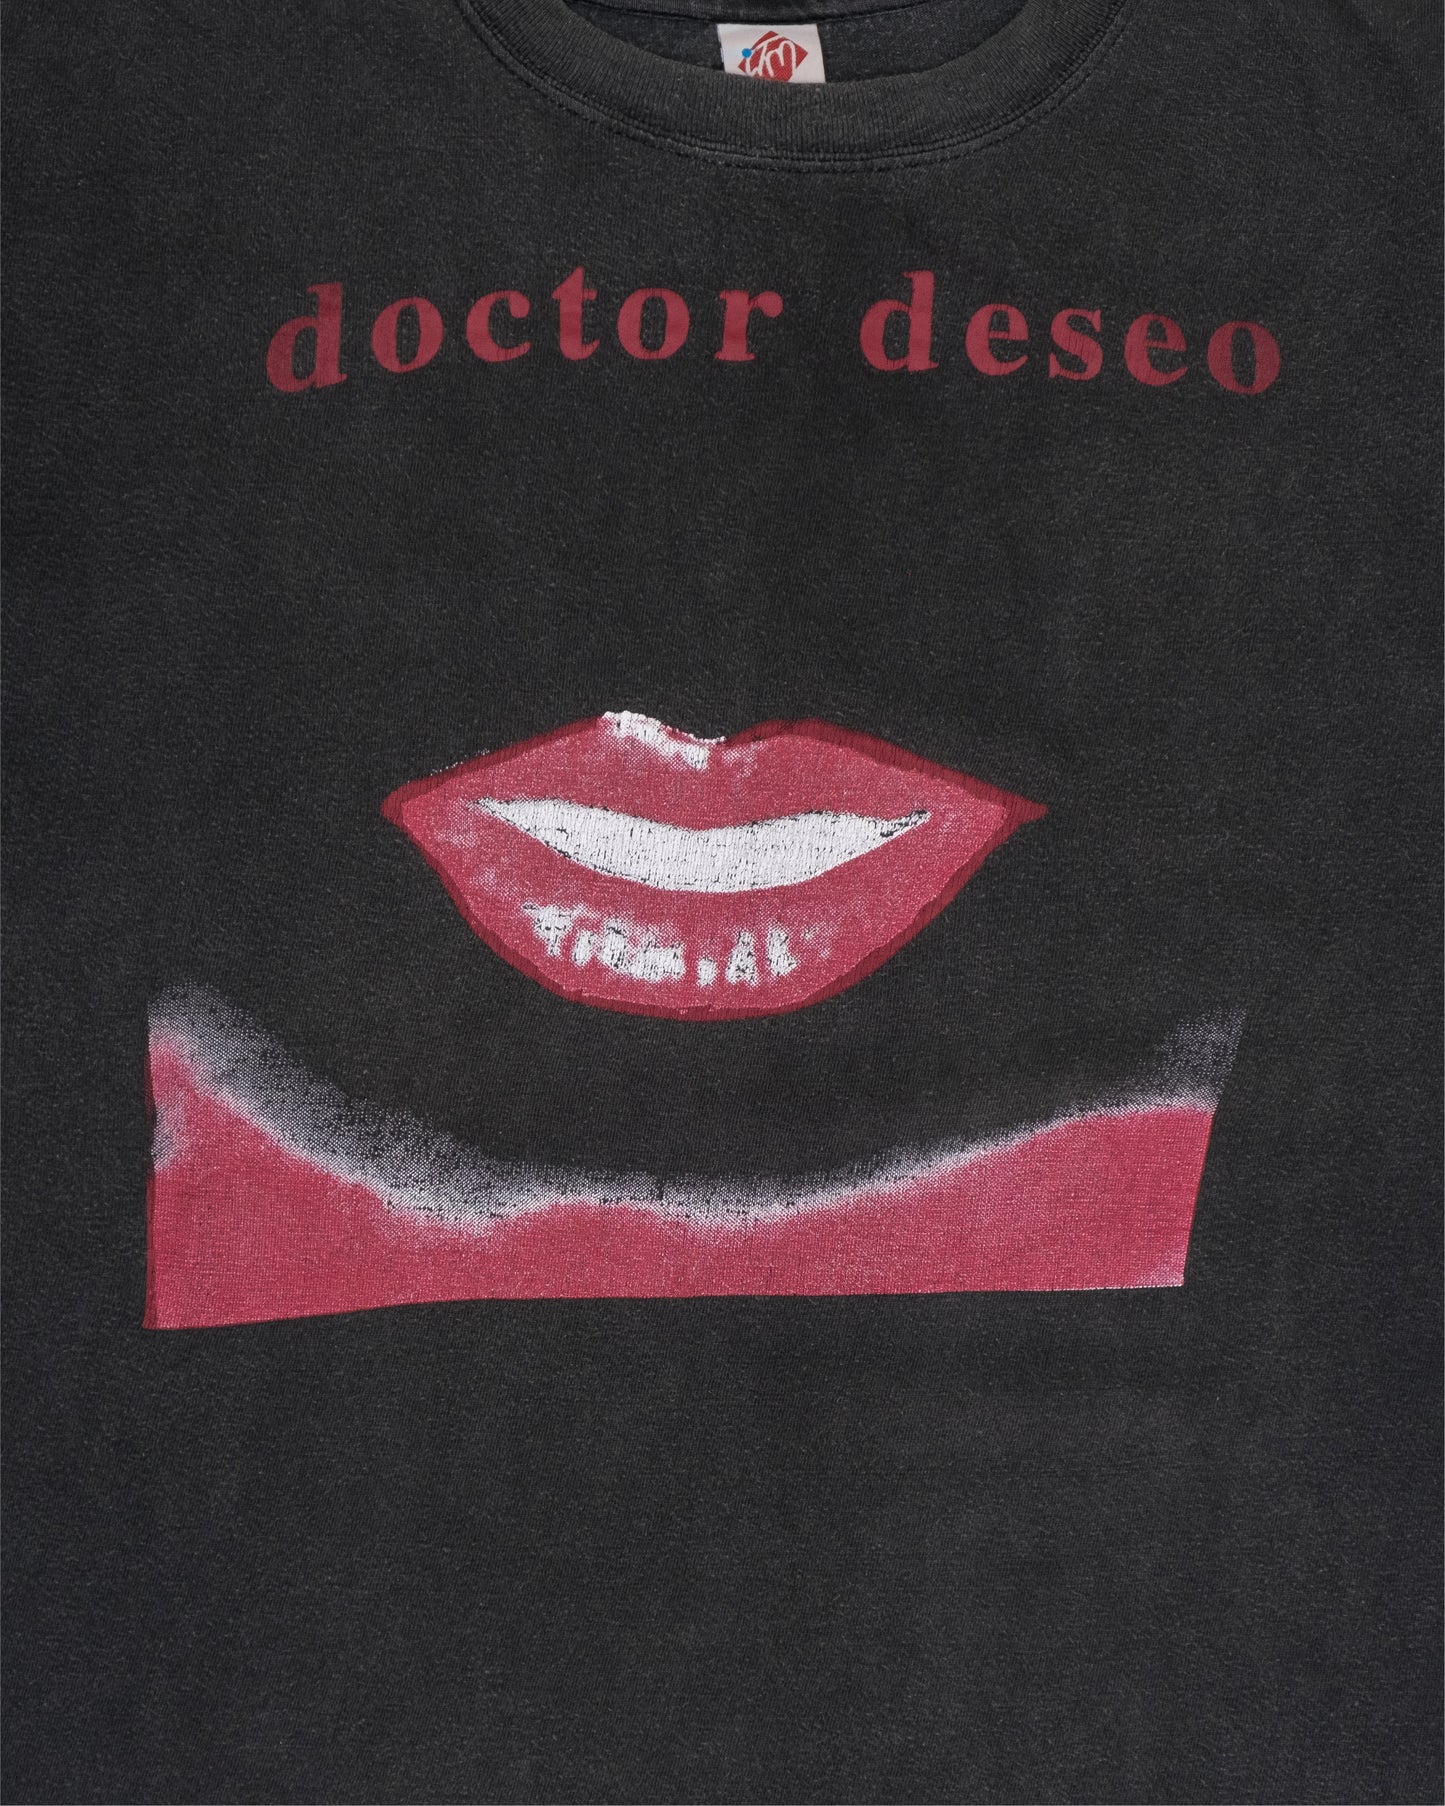 1990s Doctor Deseo T-Shirt